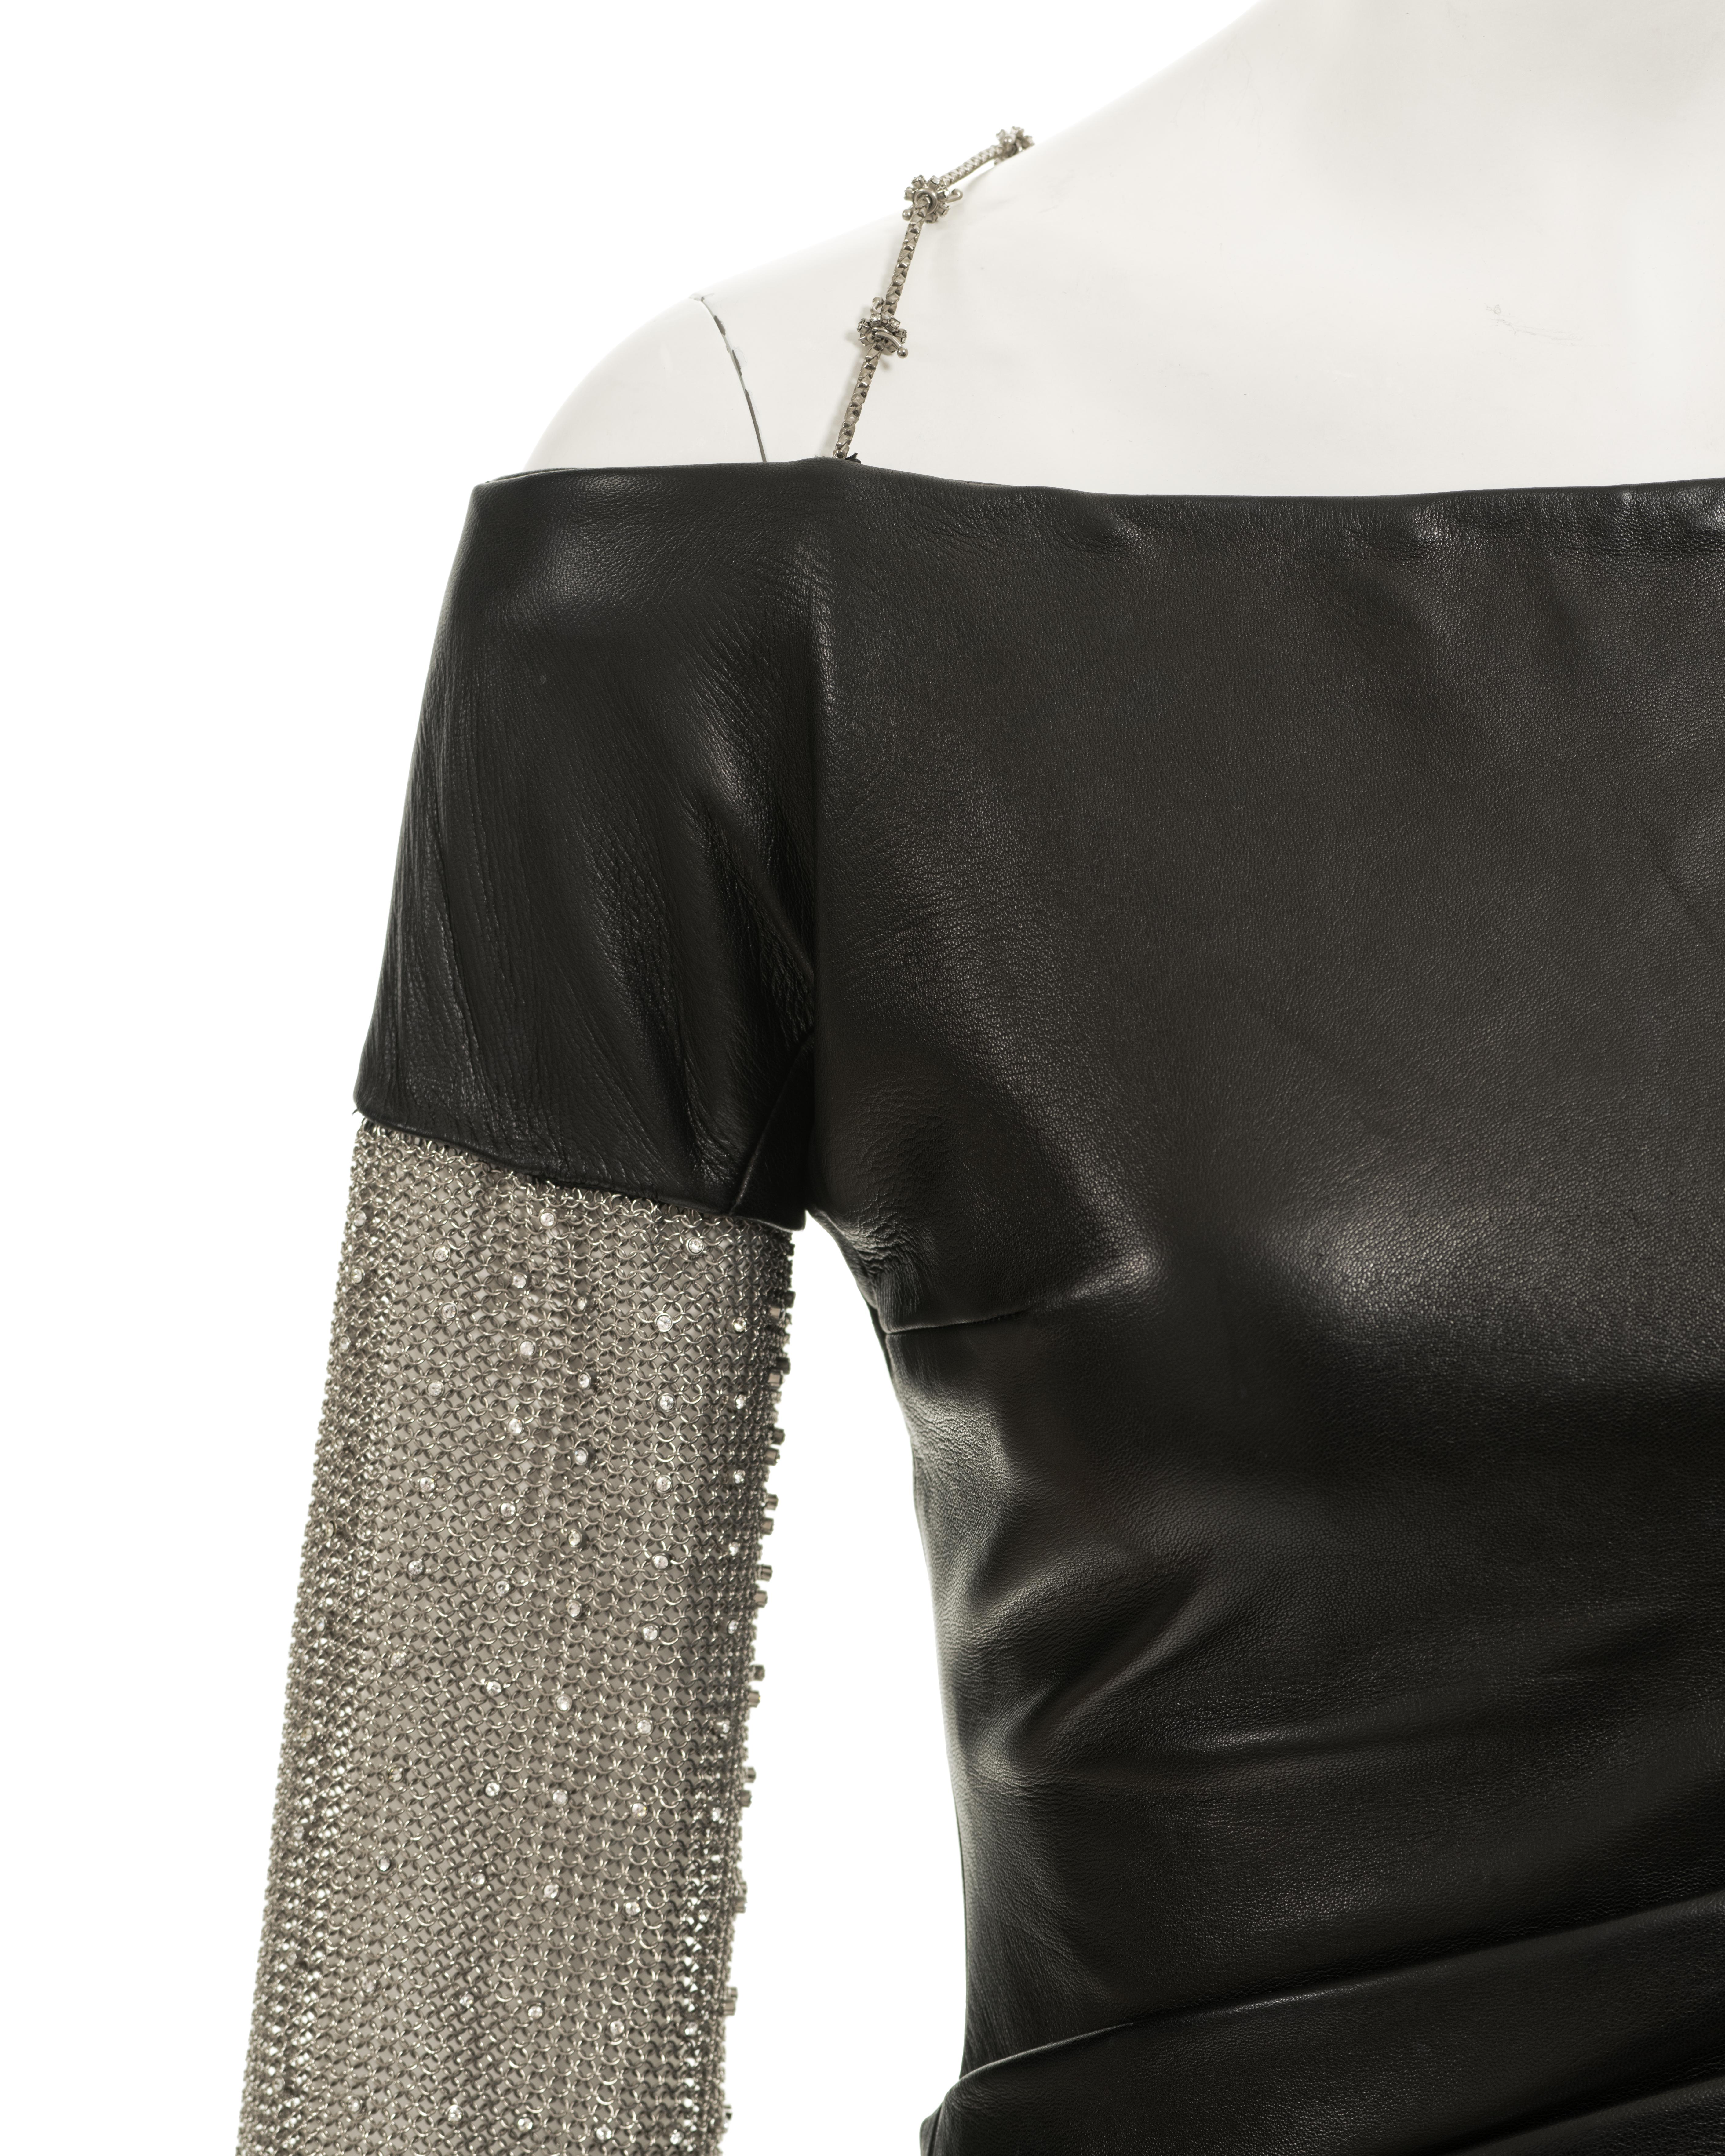 Gianni Versace black leather evening dress with chainmail sleeves, fw 1998 1